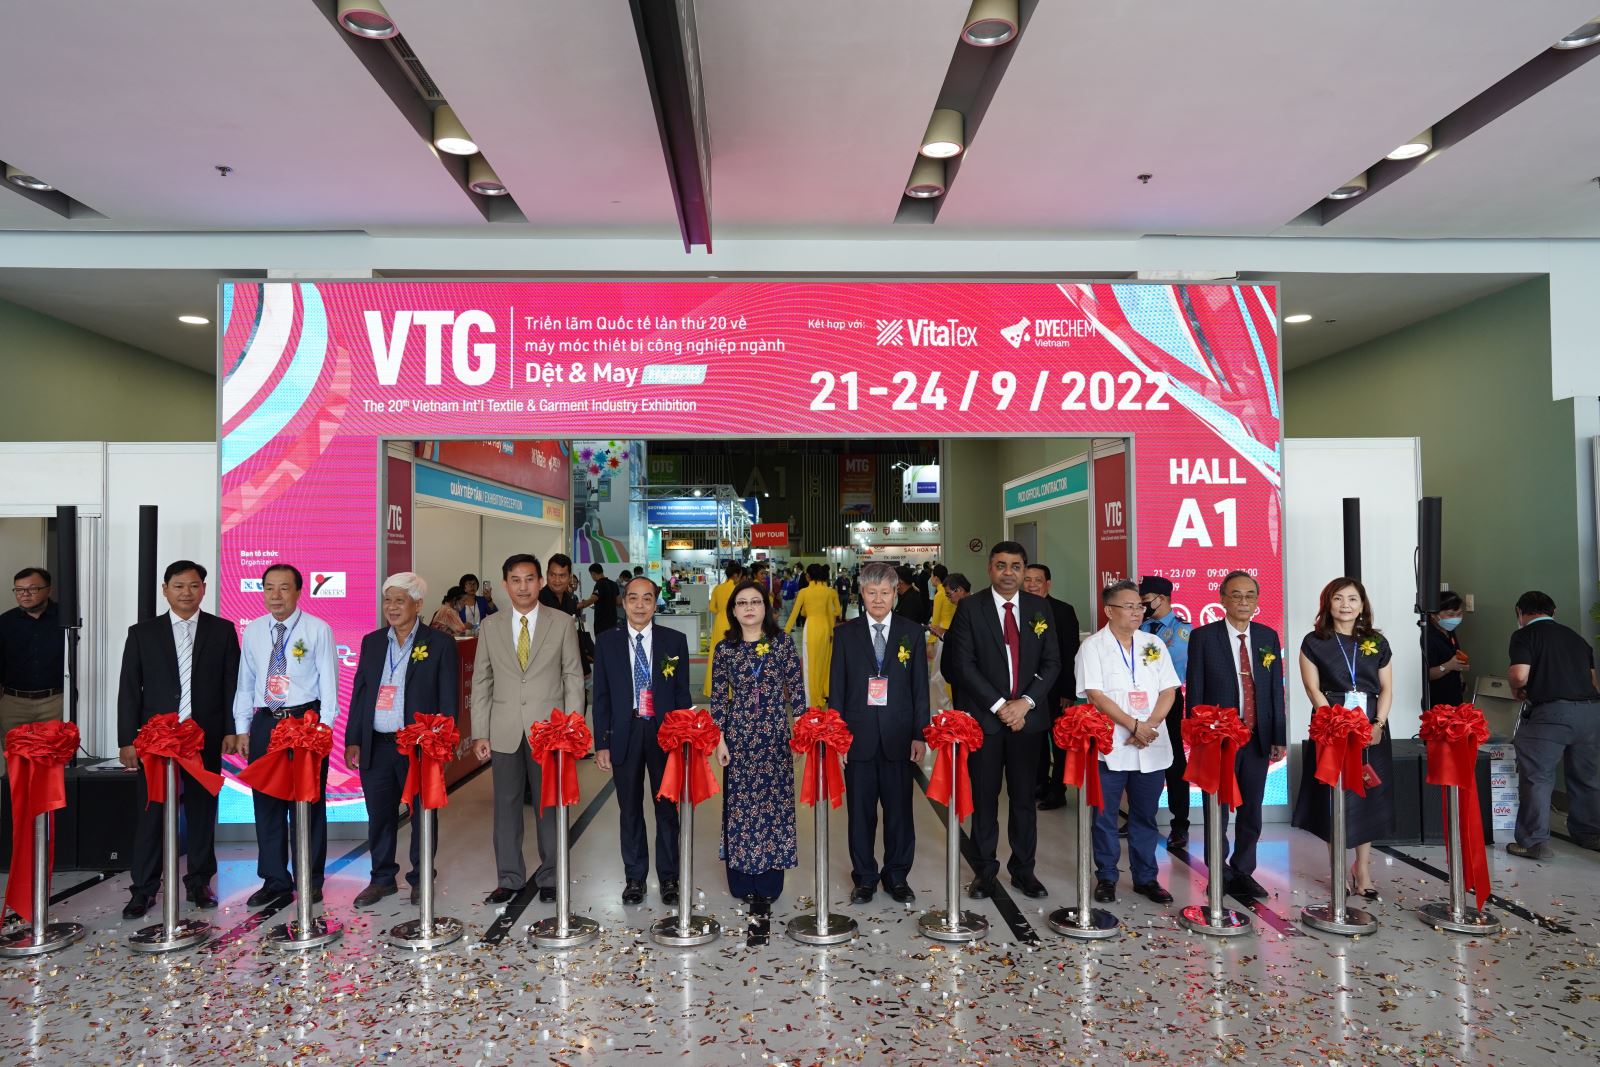 The 20th Vietnam International Textile and Garment Industry Exhibition (VTG) will return